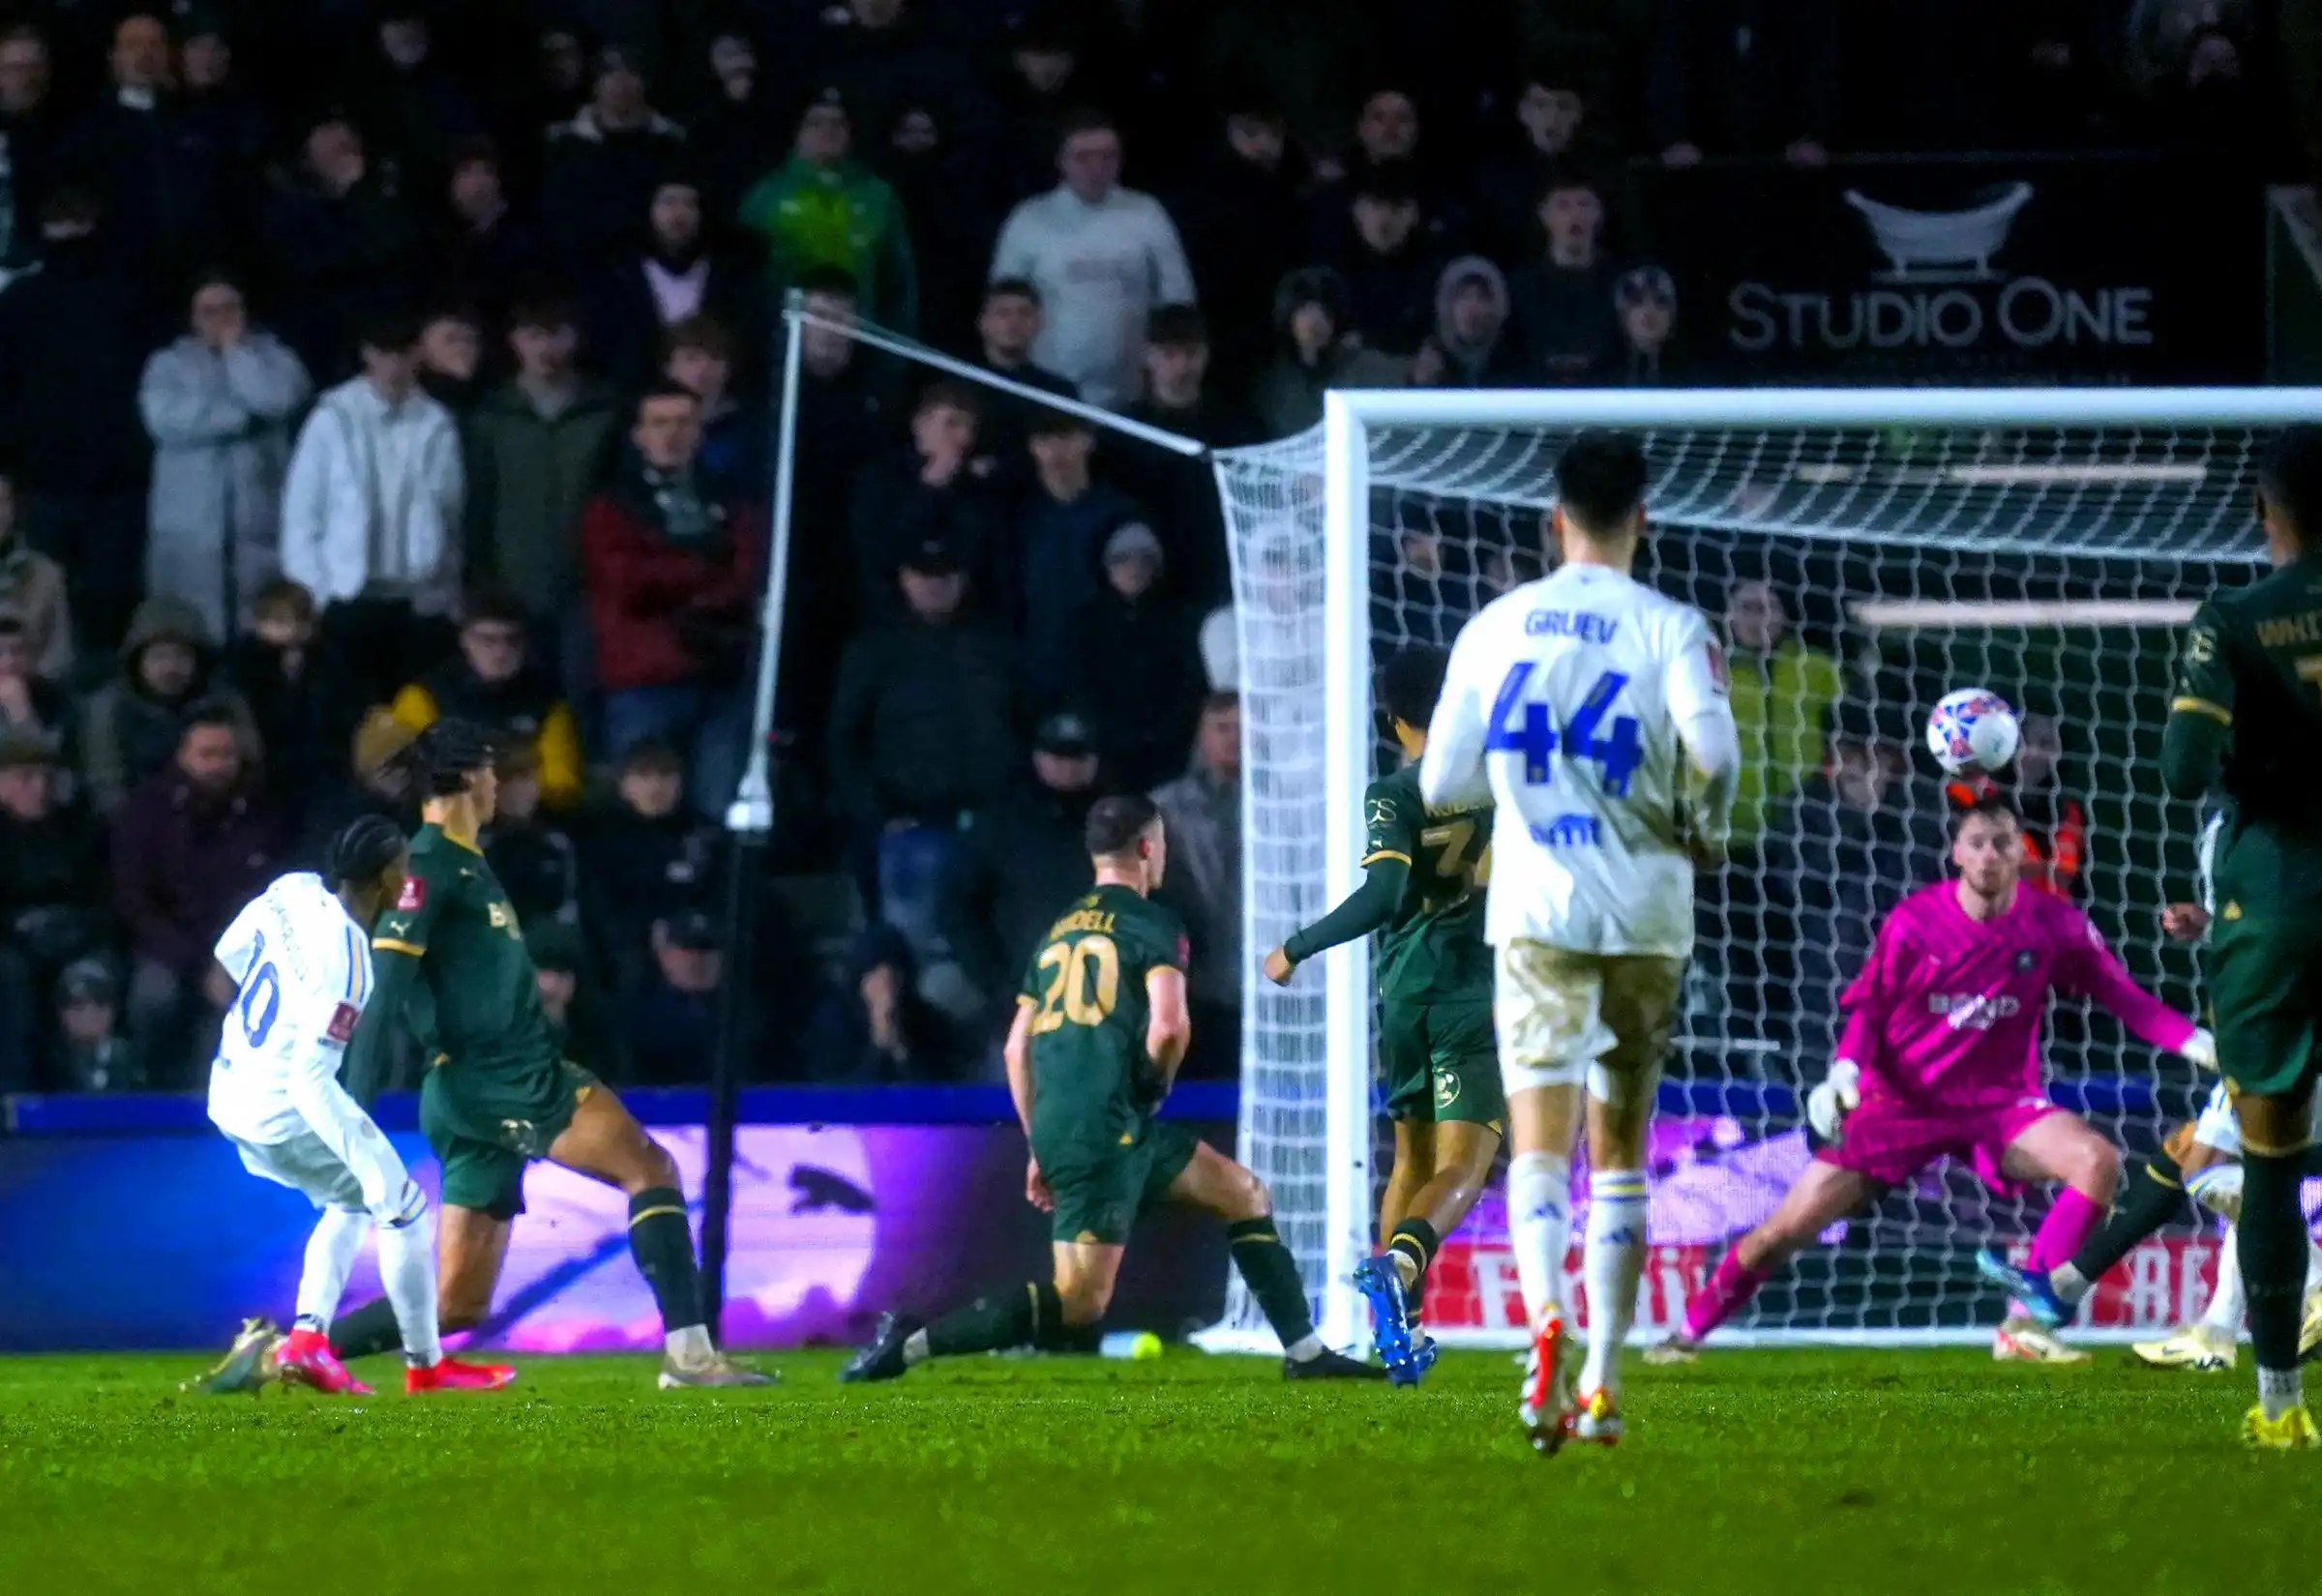 Leeds punish Plymouth extra-time Villa Chelsea FA Cup tie